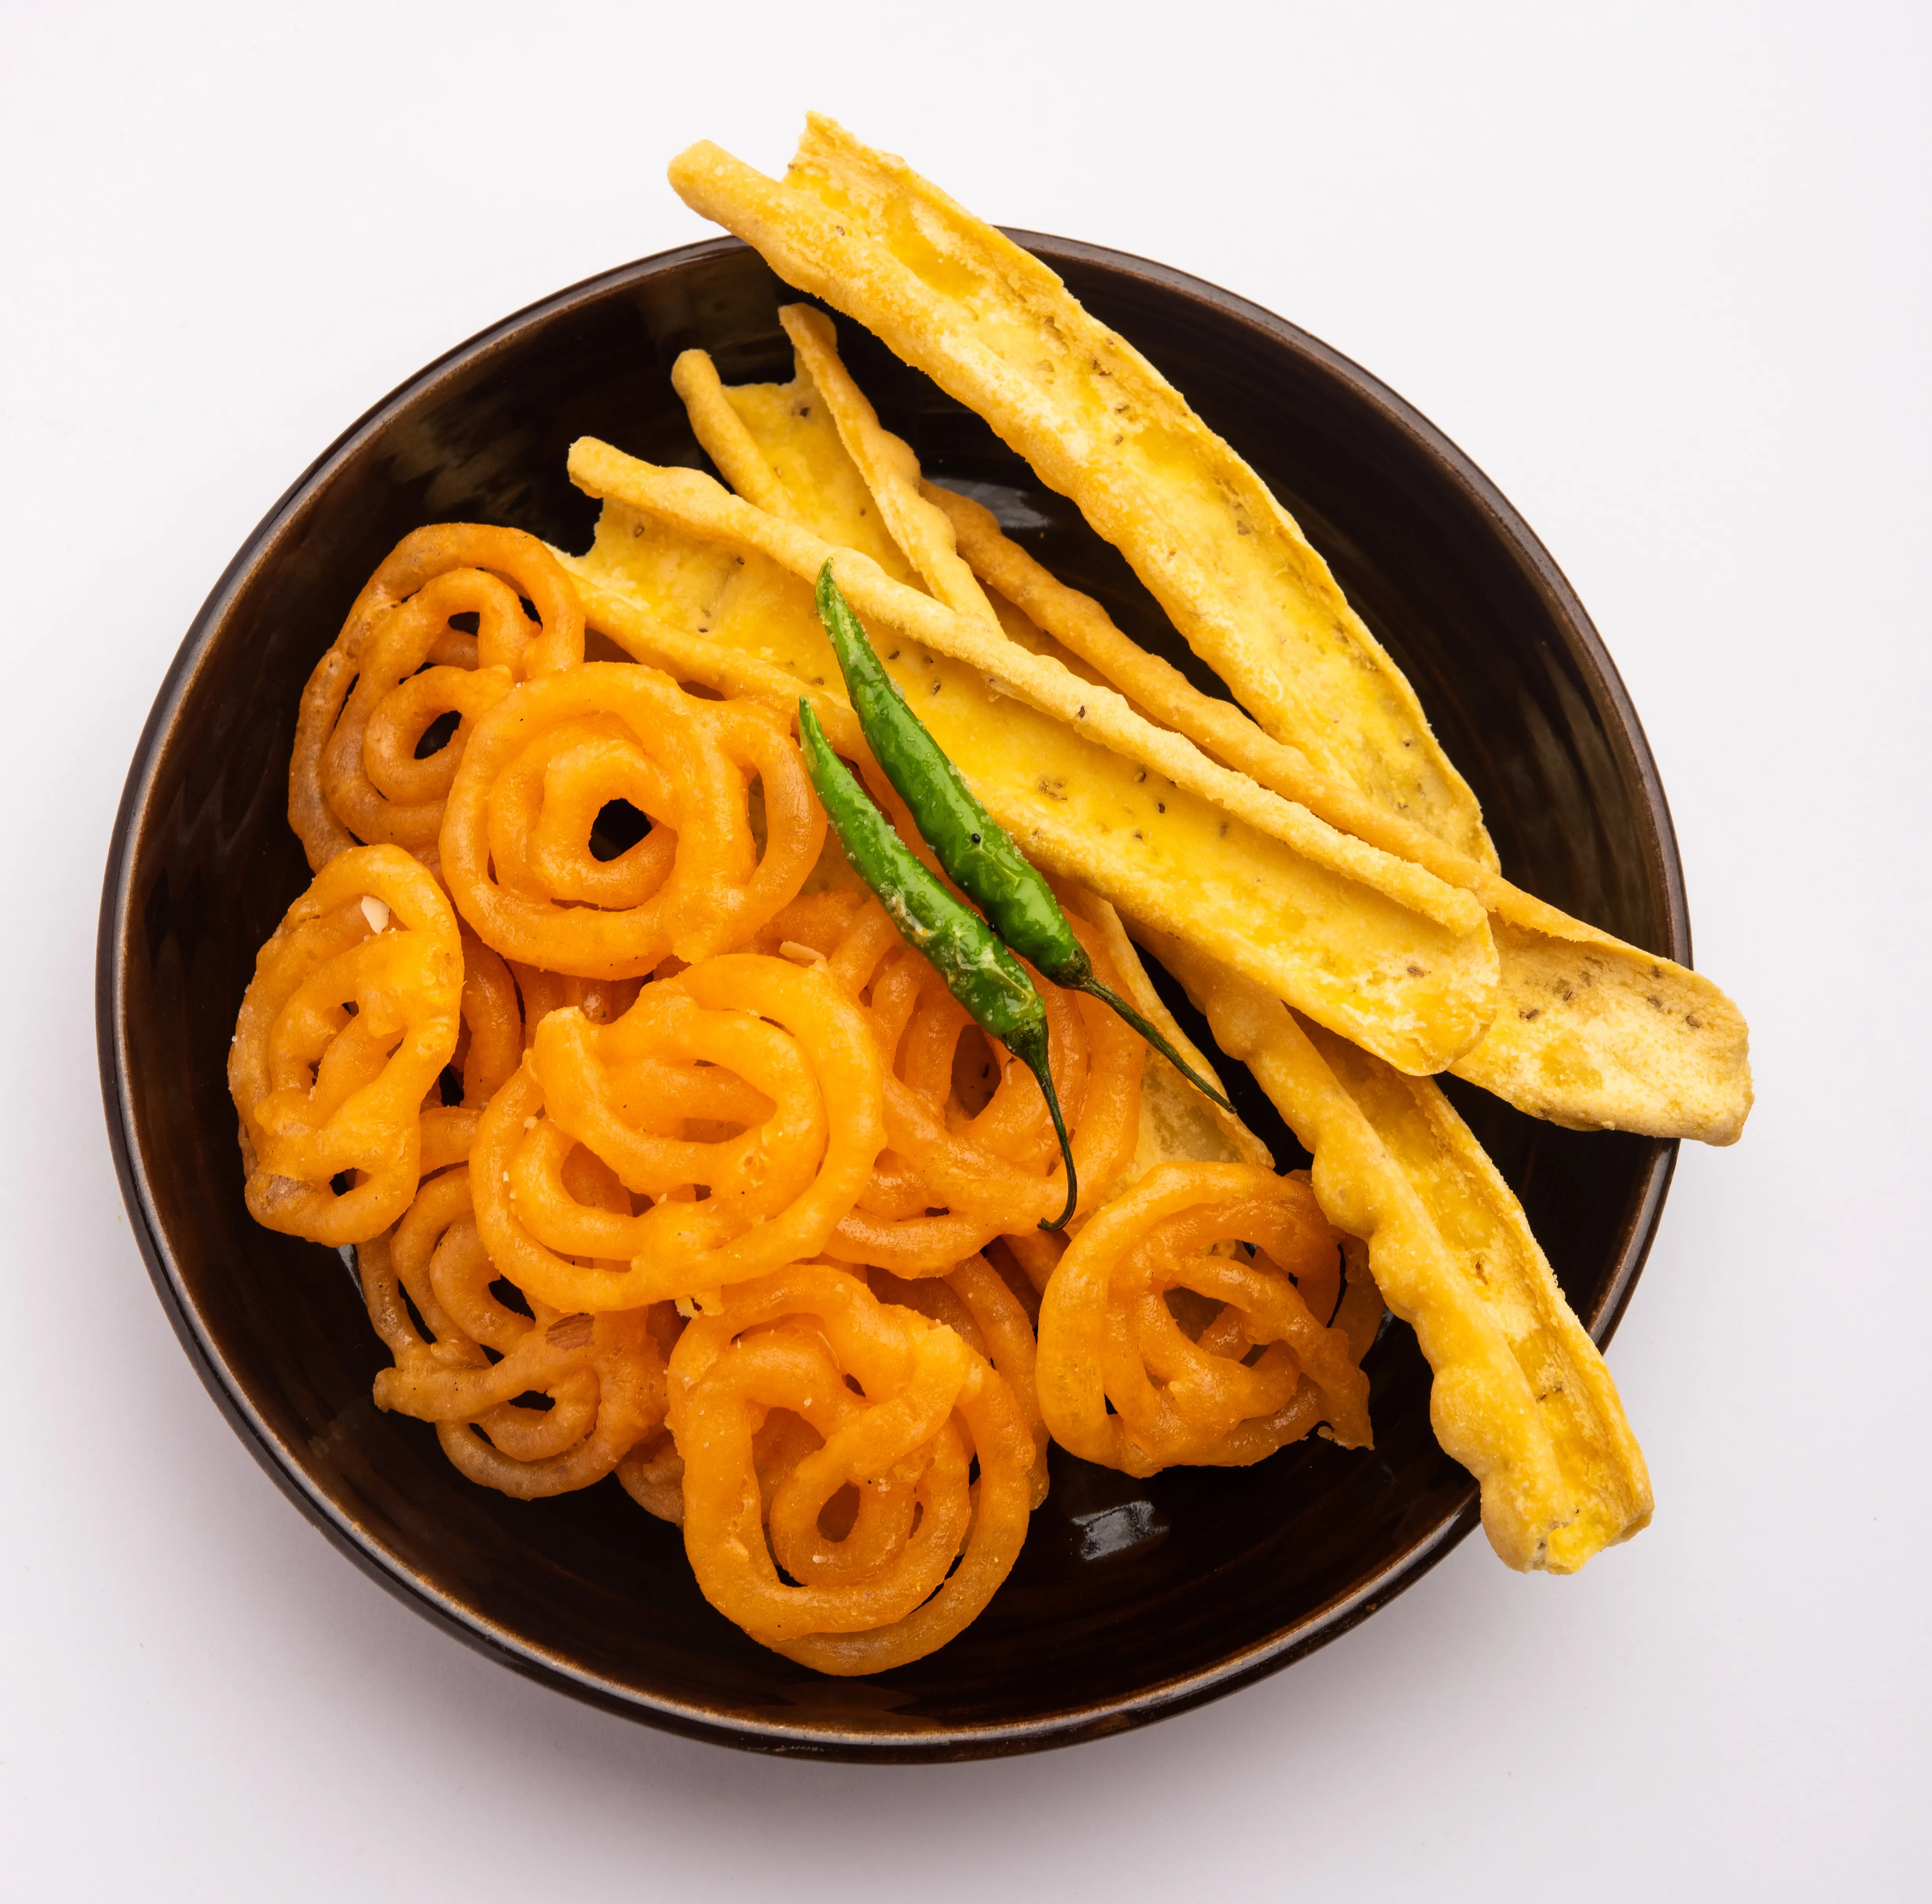 Image of an Indian dessert and snack - Jalebi with Fafda